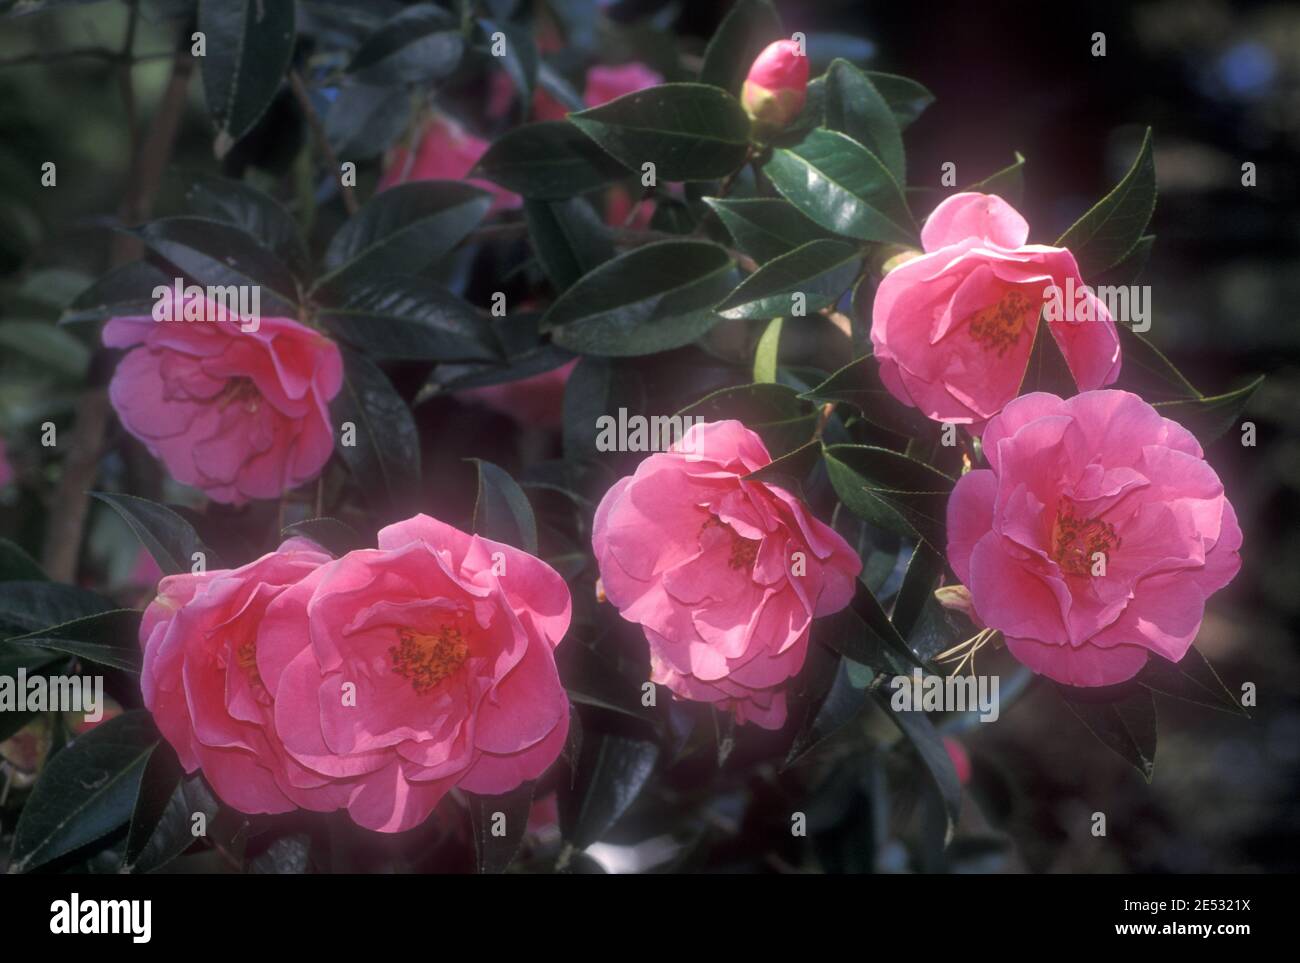 PINK CAMELLIA FLOWERS Stock Photo